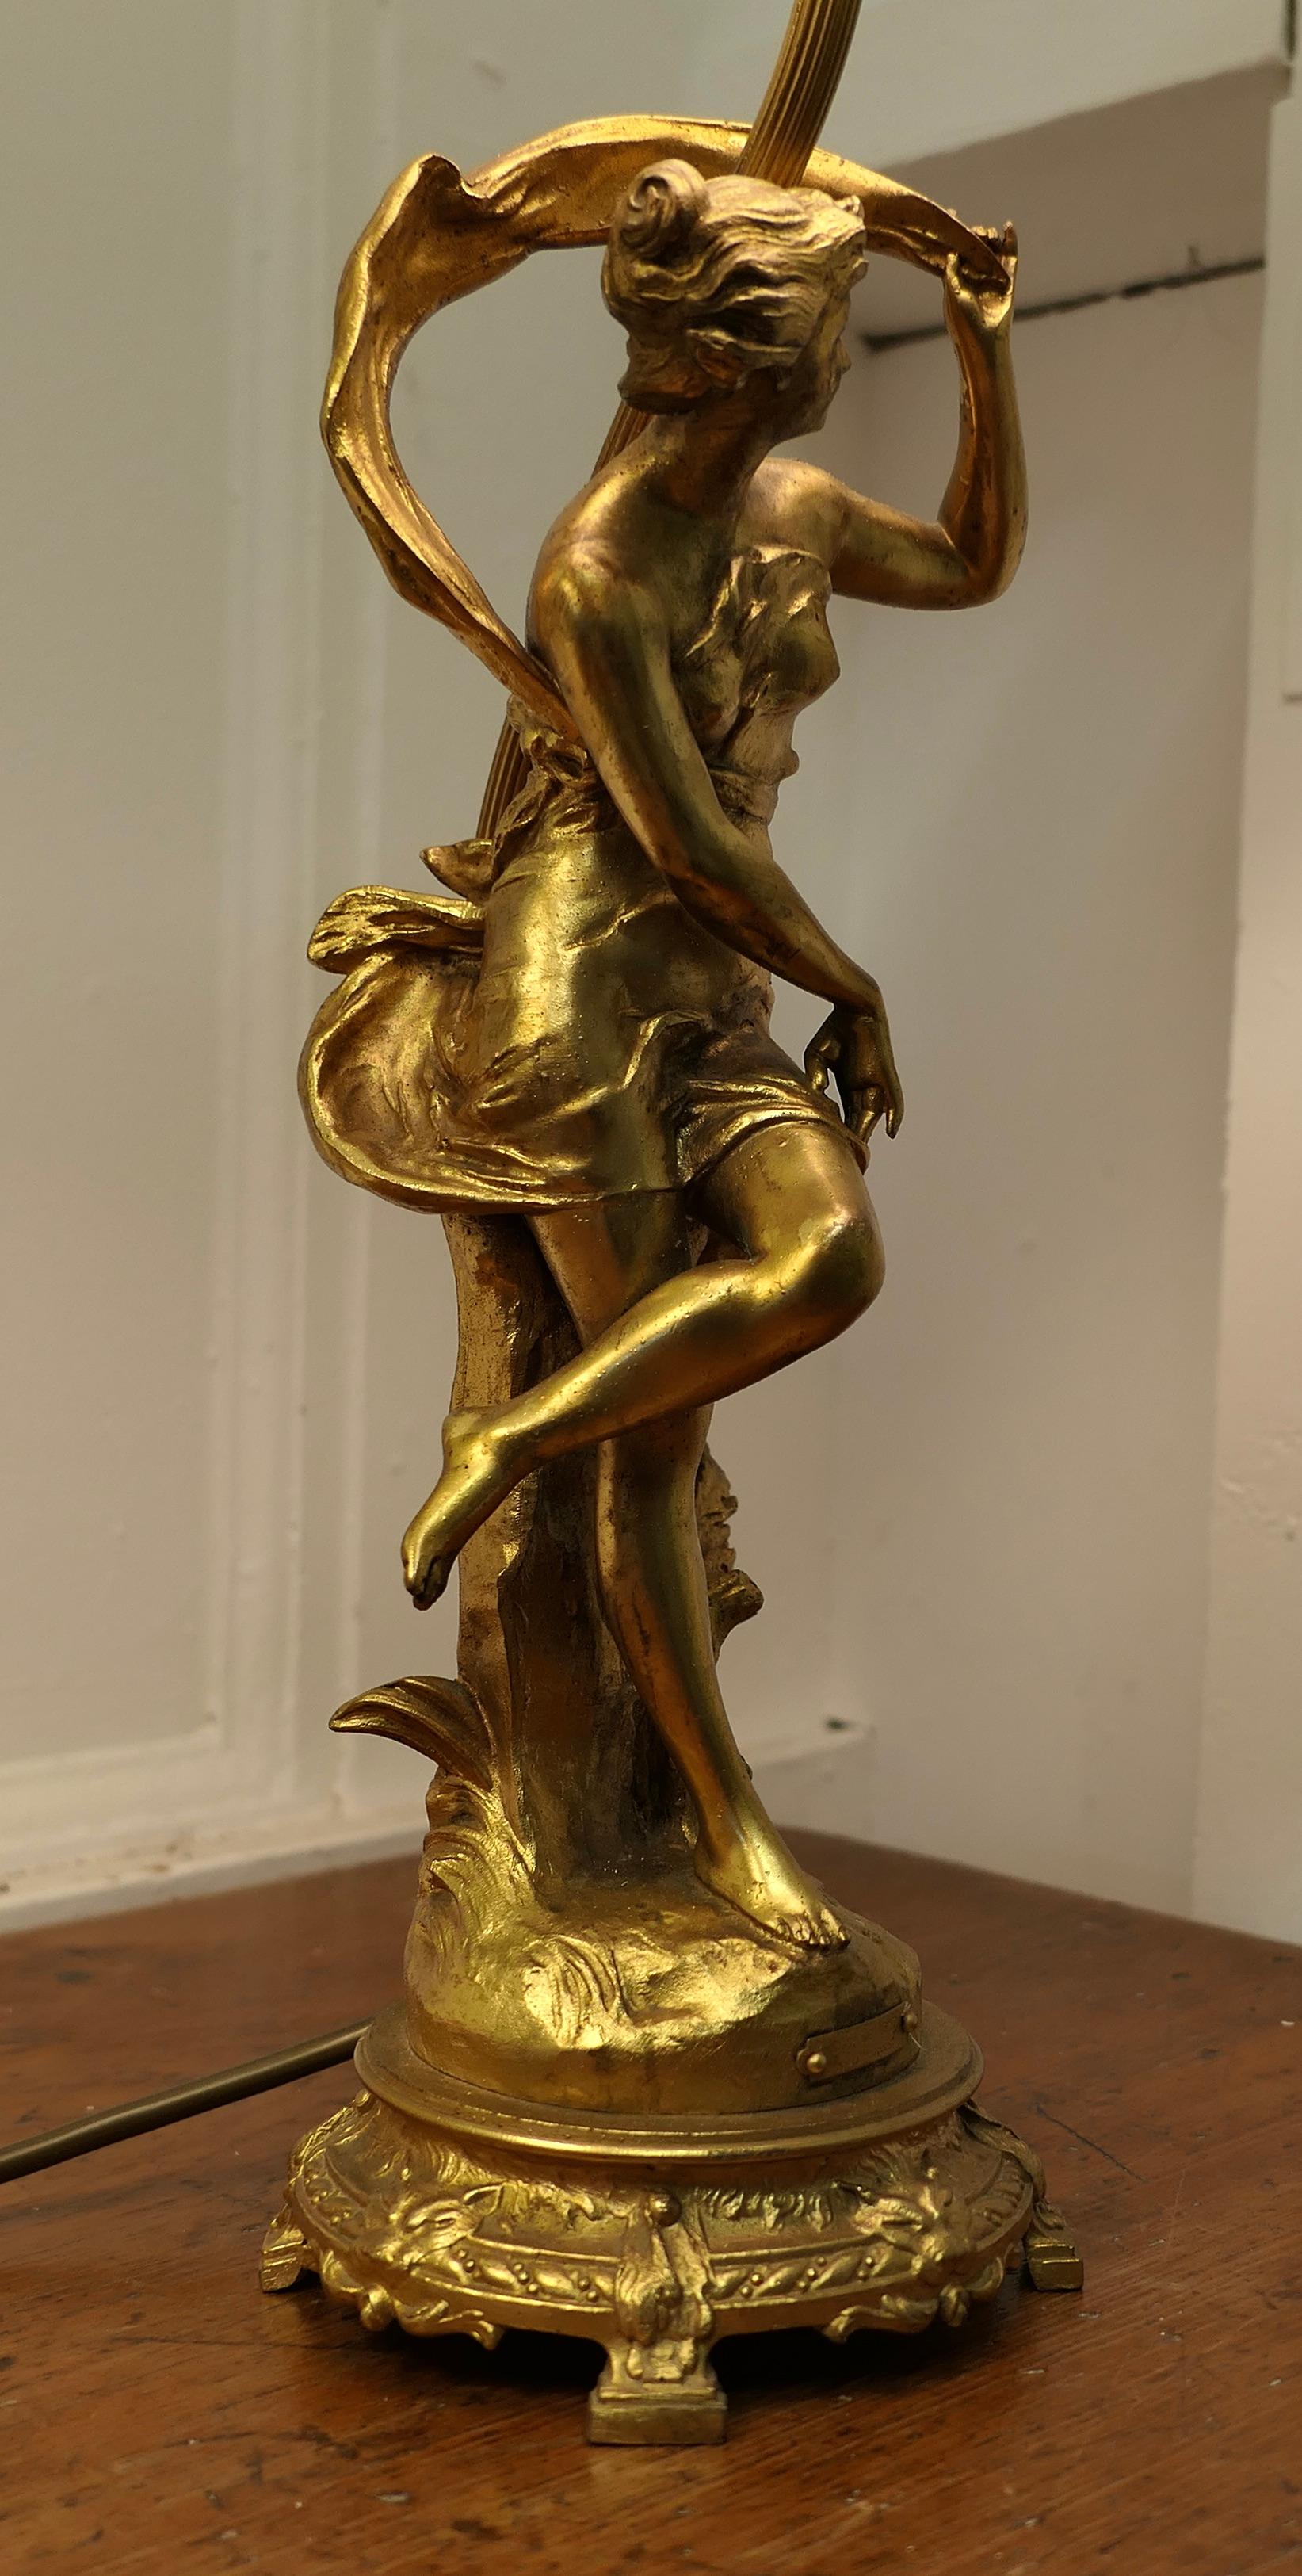 A Pair of French Figural Brass Lamps, after Ernest Justin Ferrand

A Pair of French Figural Brass Lamps, Coup de Soleil and Coup de Vent by Ferrand
 This charming pair dates from the 1900s, each figure has a gilt patina and an identifying plaque and